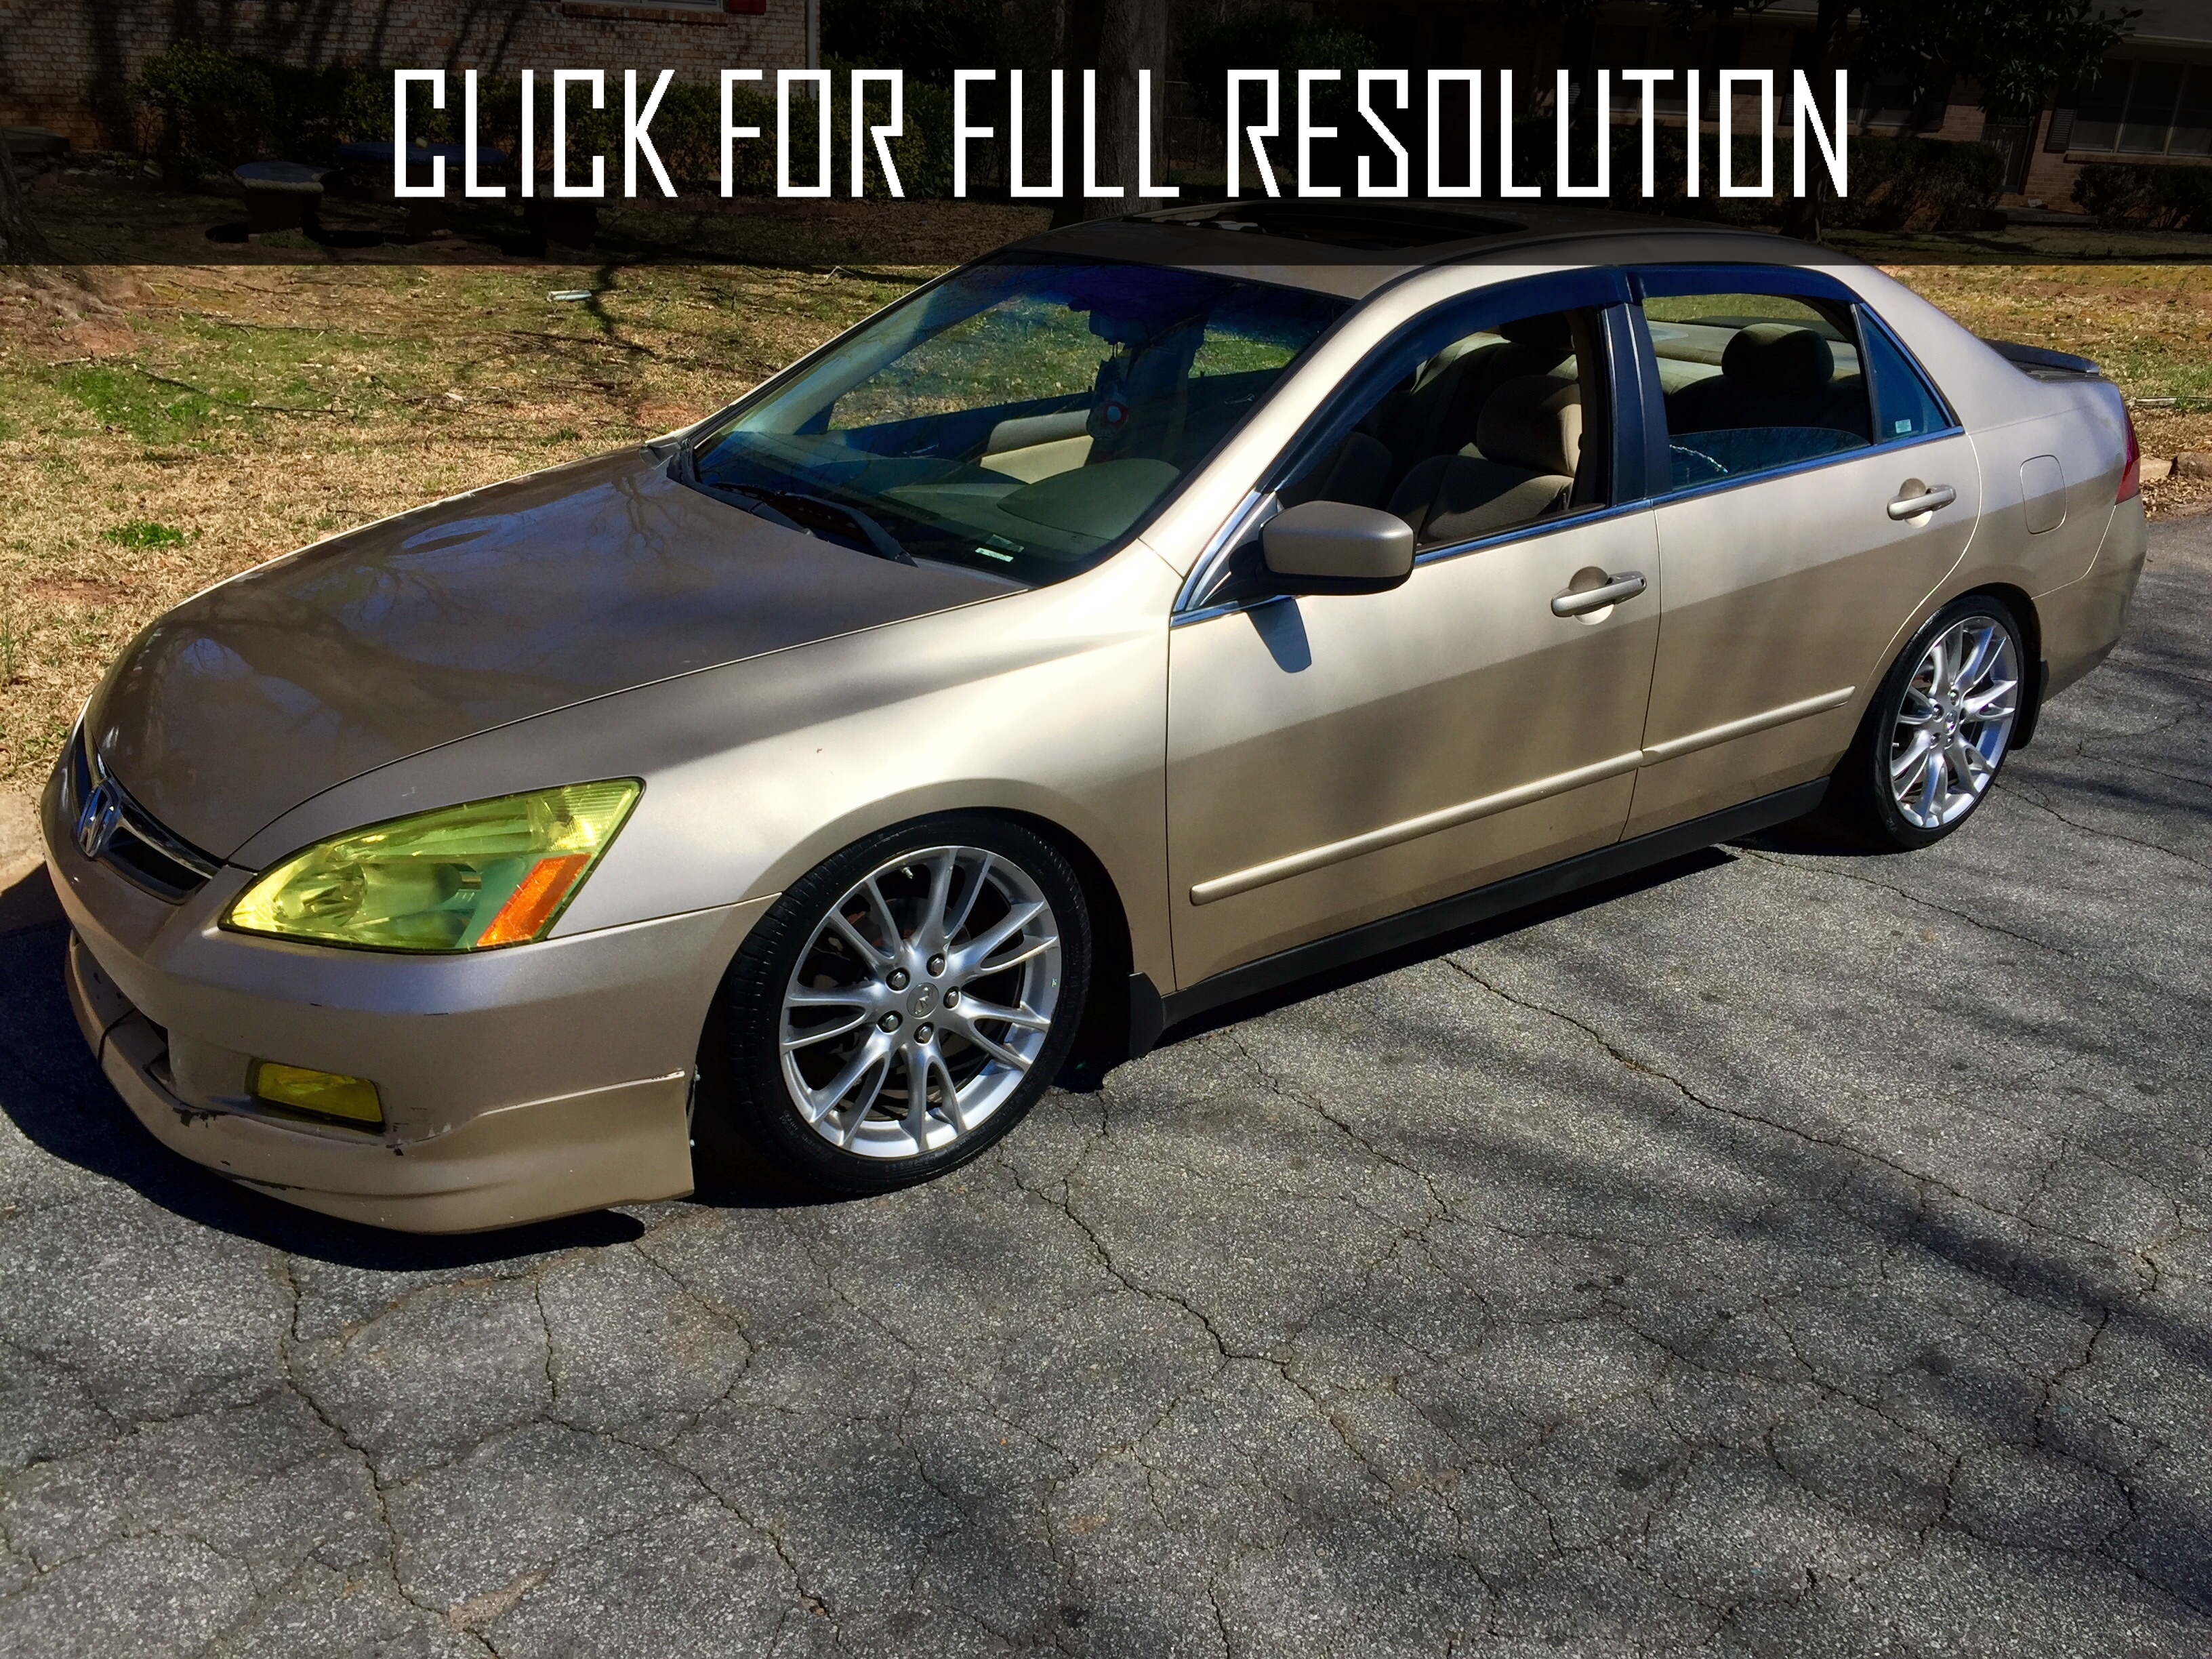 Honda Accord 7th Gen - amazing photo gallery, some information and